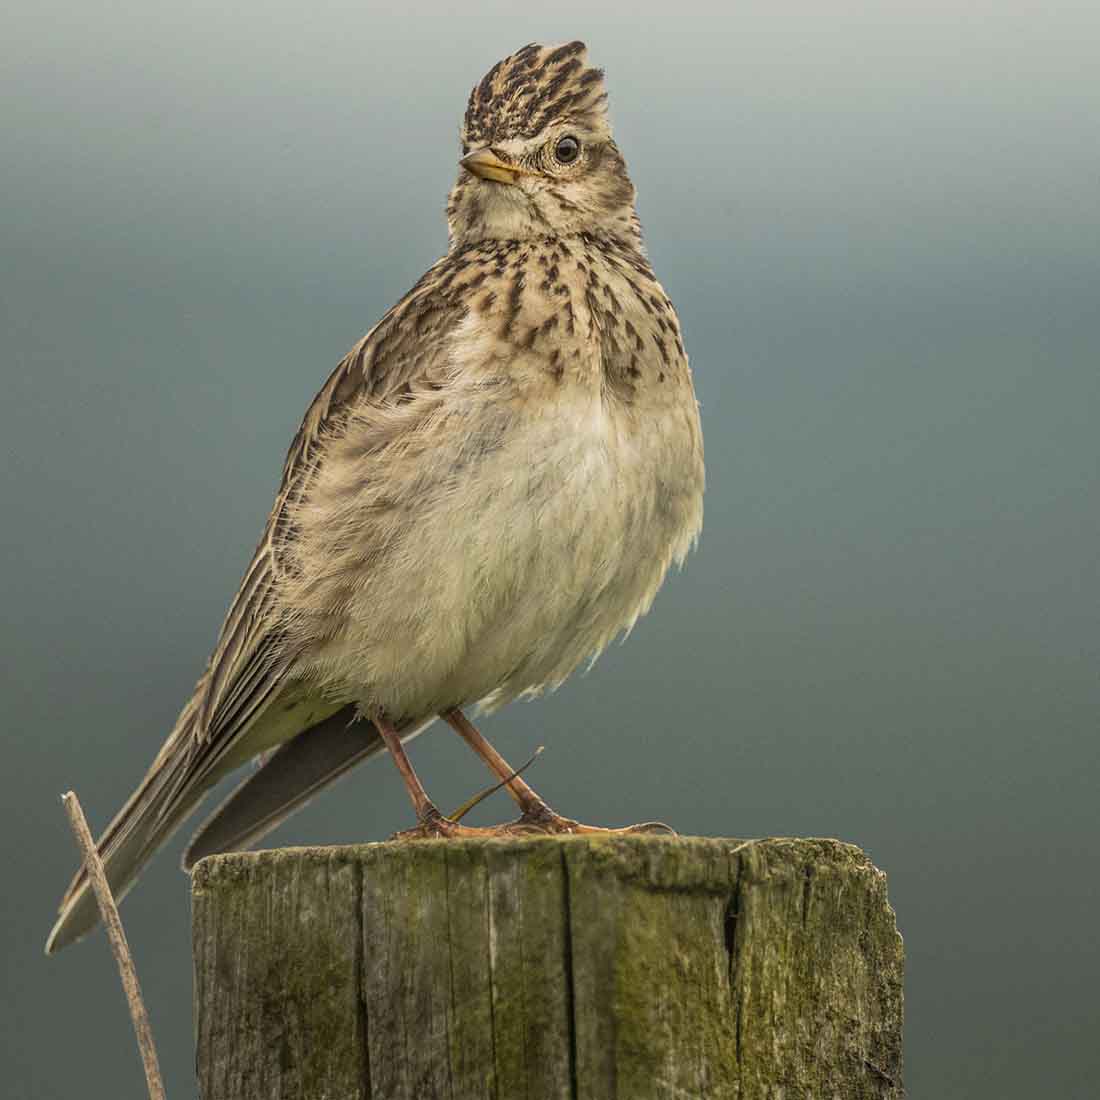 A skylark perched on the top of a fence post